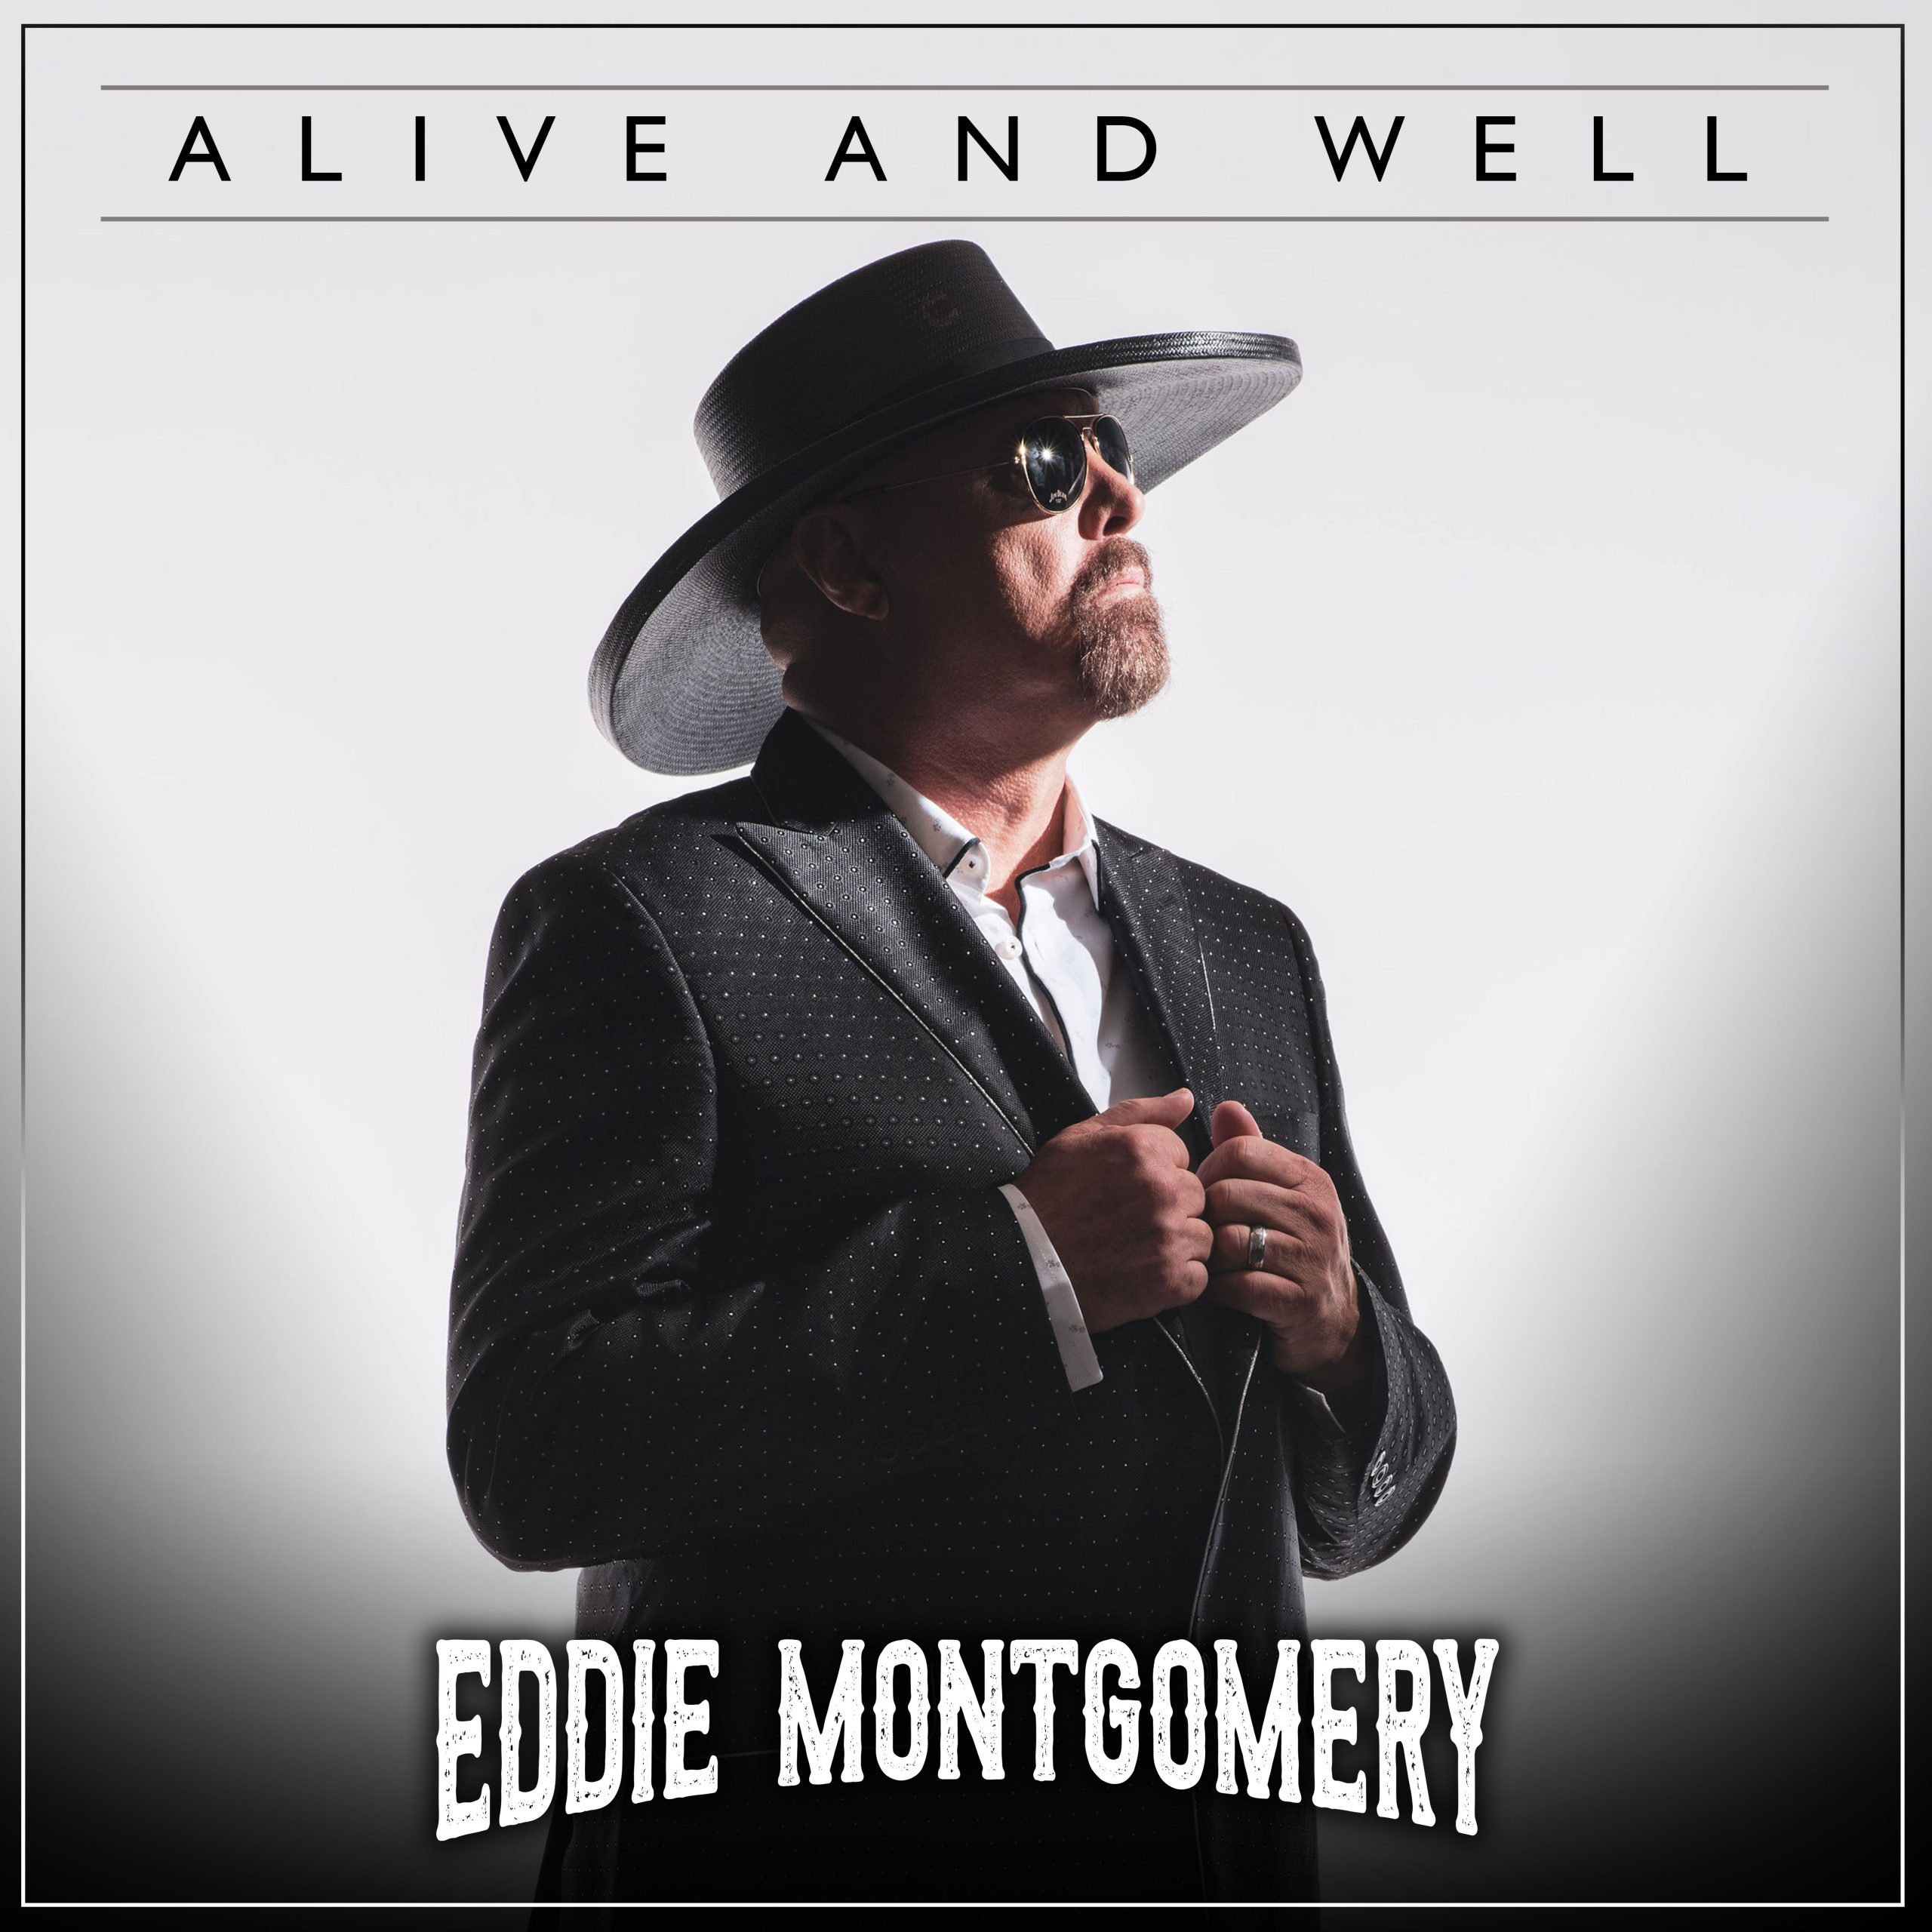 Eddie-Montgomery-Alive-and-Well-Final-scaled.jpg